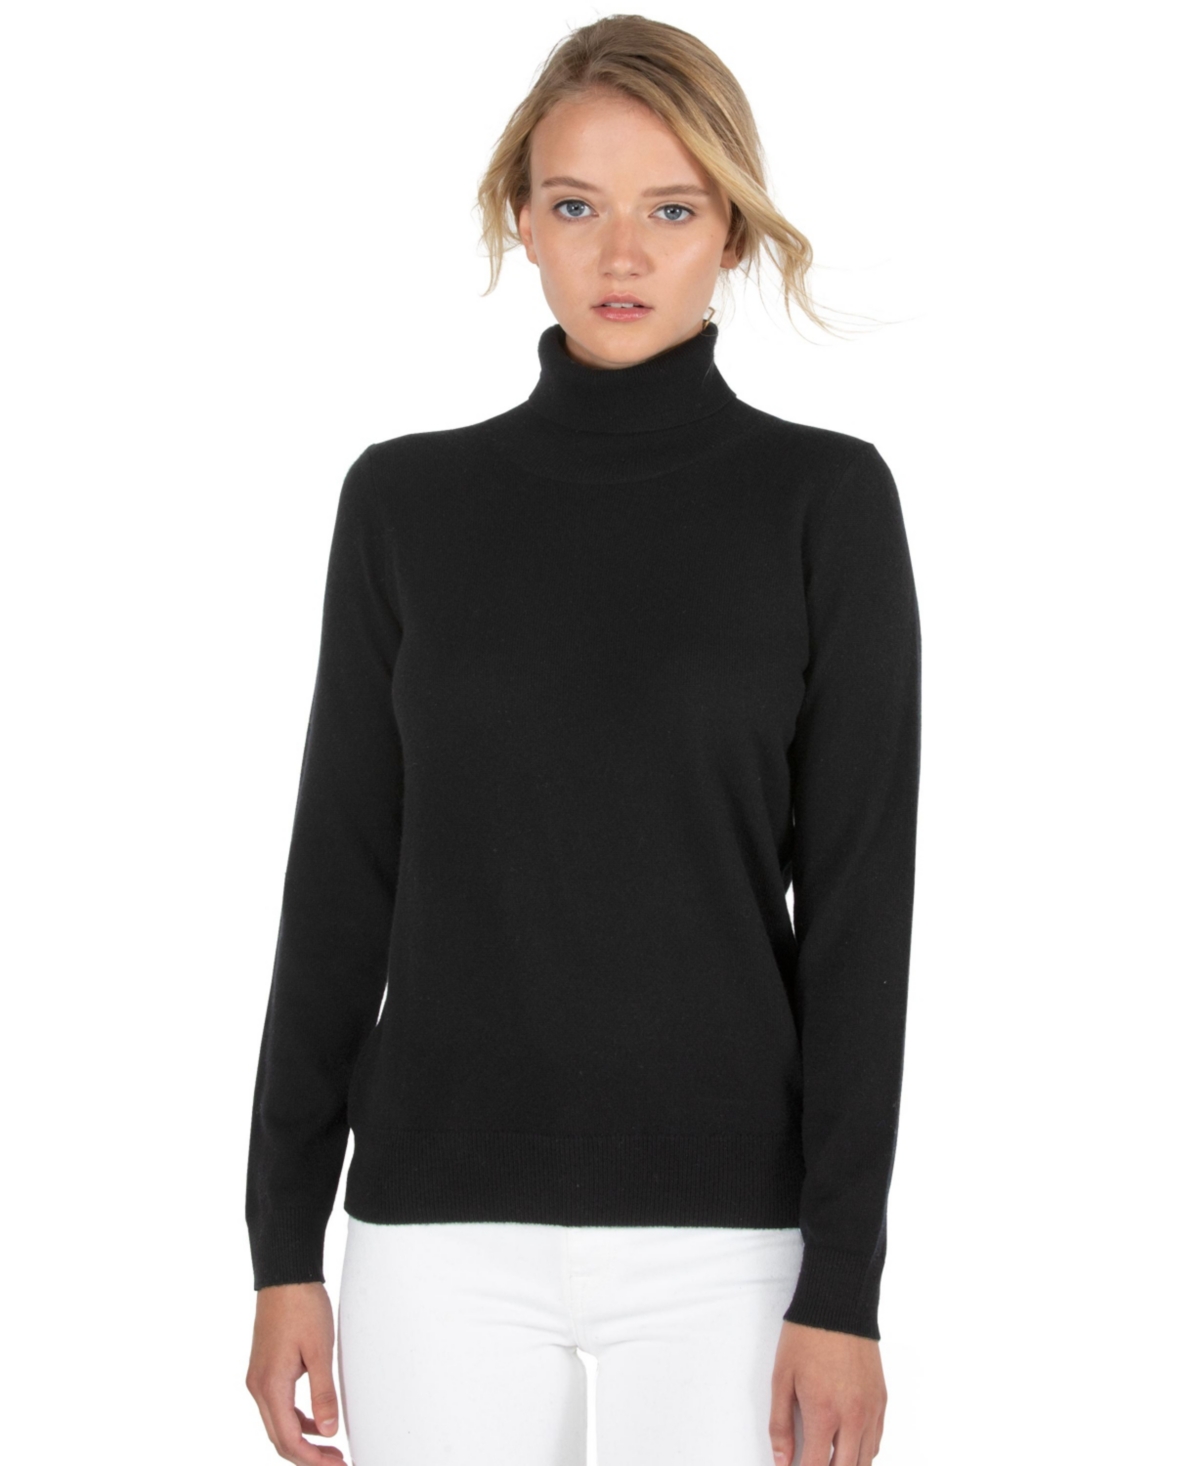 Women's 100% Pure Cashmere Long Sleeve Turtleneck Pullover Sweater - Toffee